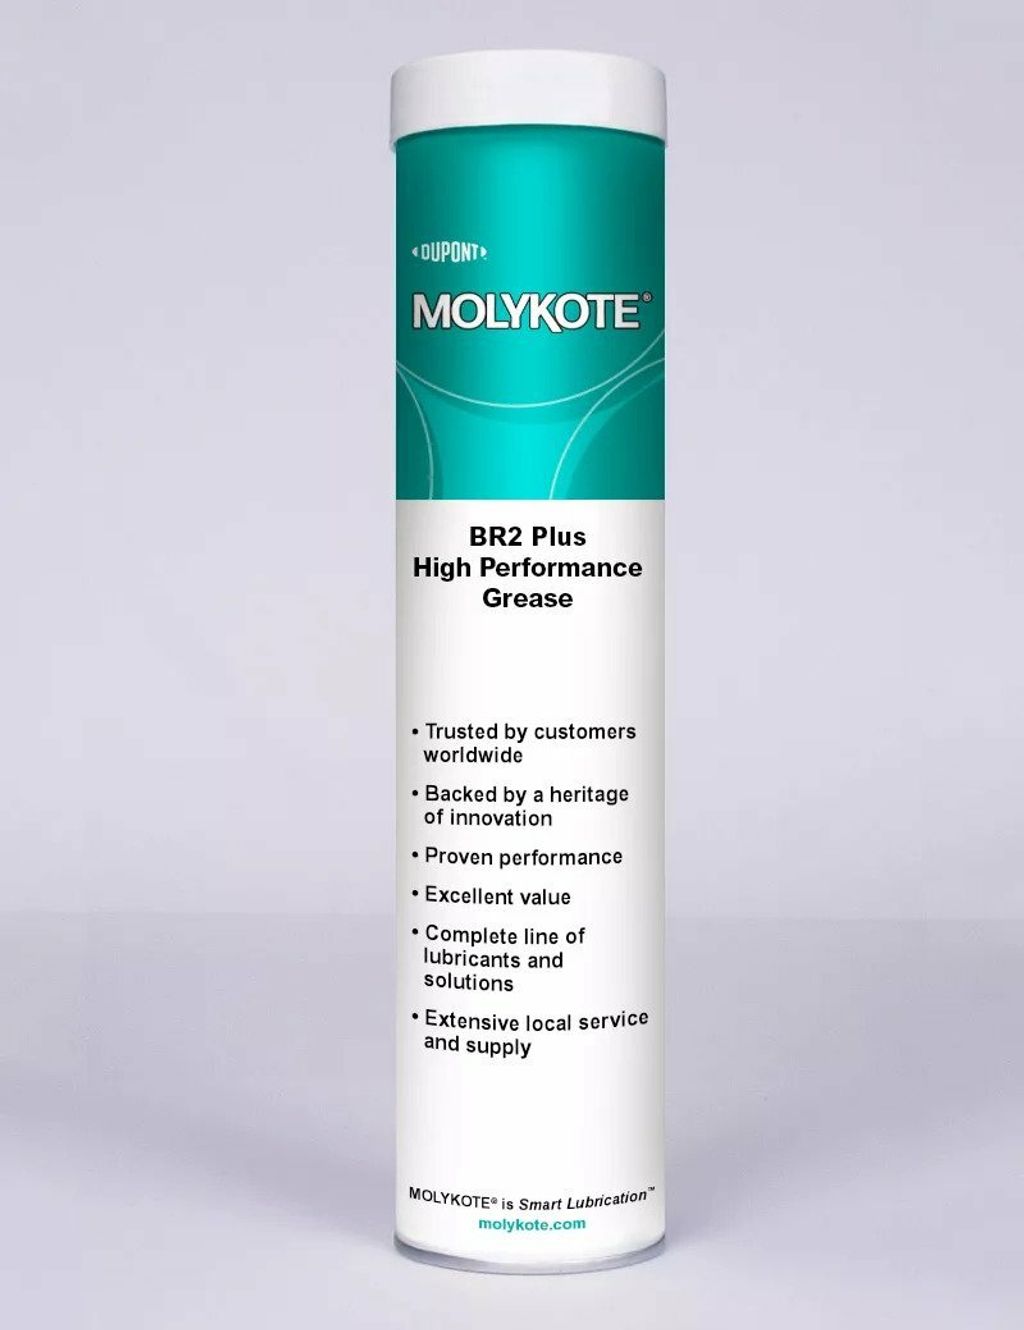 MOLYKOTE® BR-2 Plus High Performance Grease